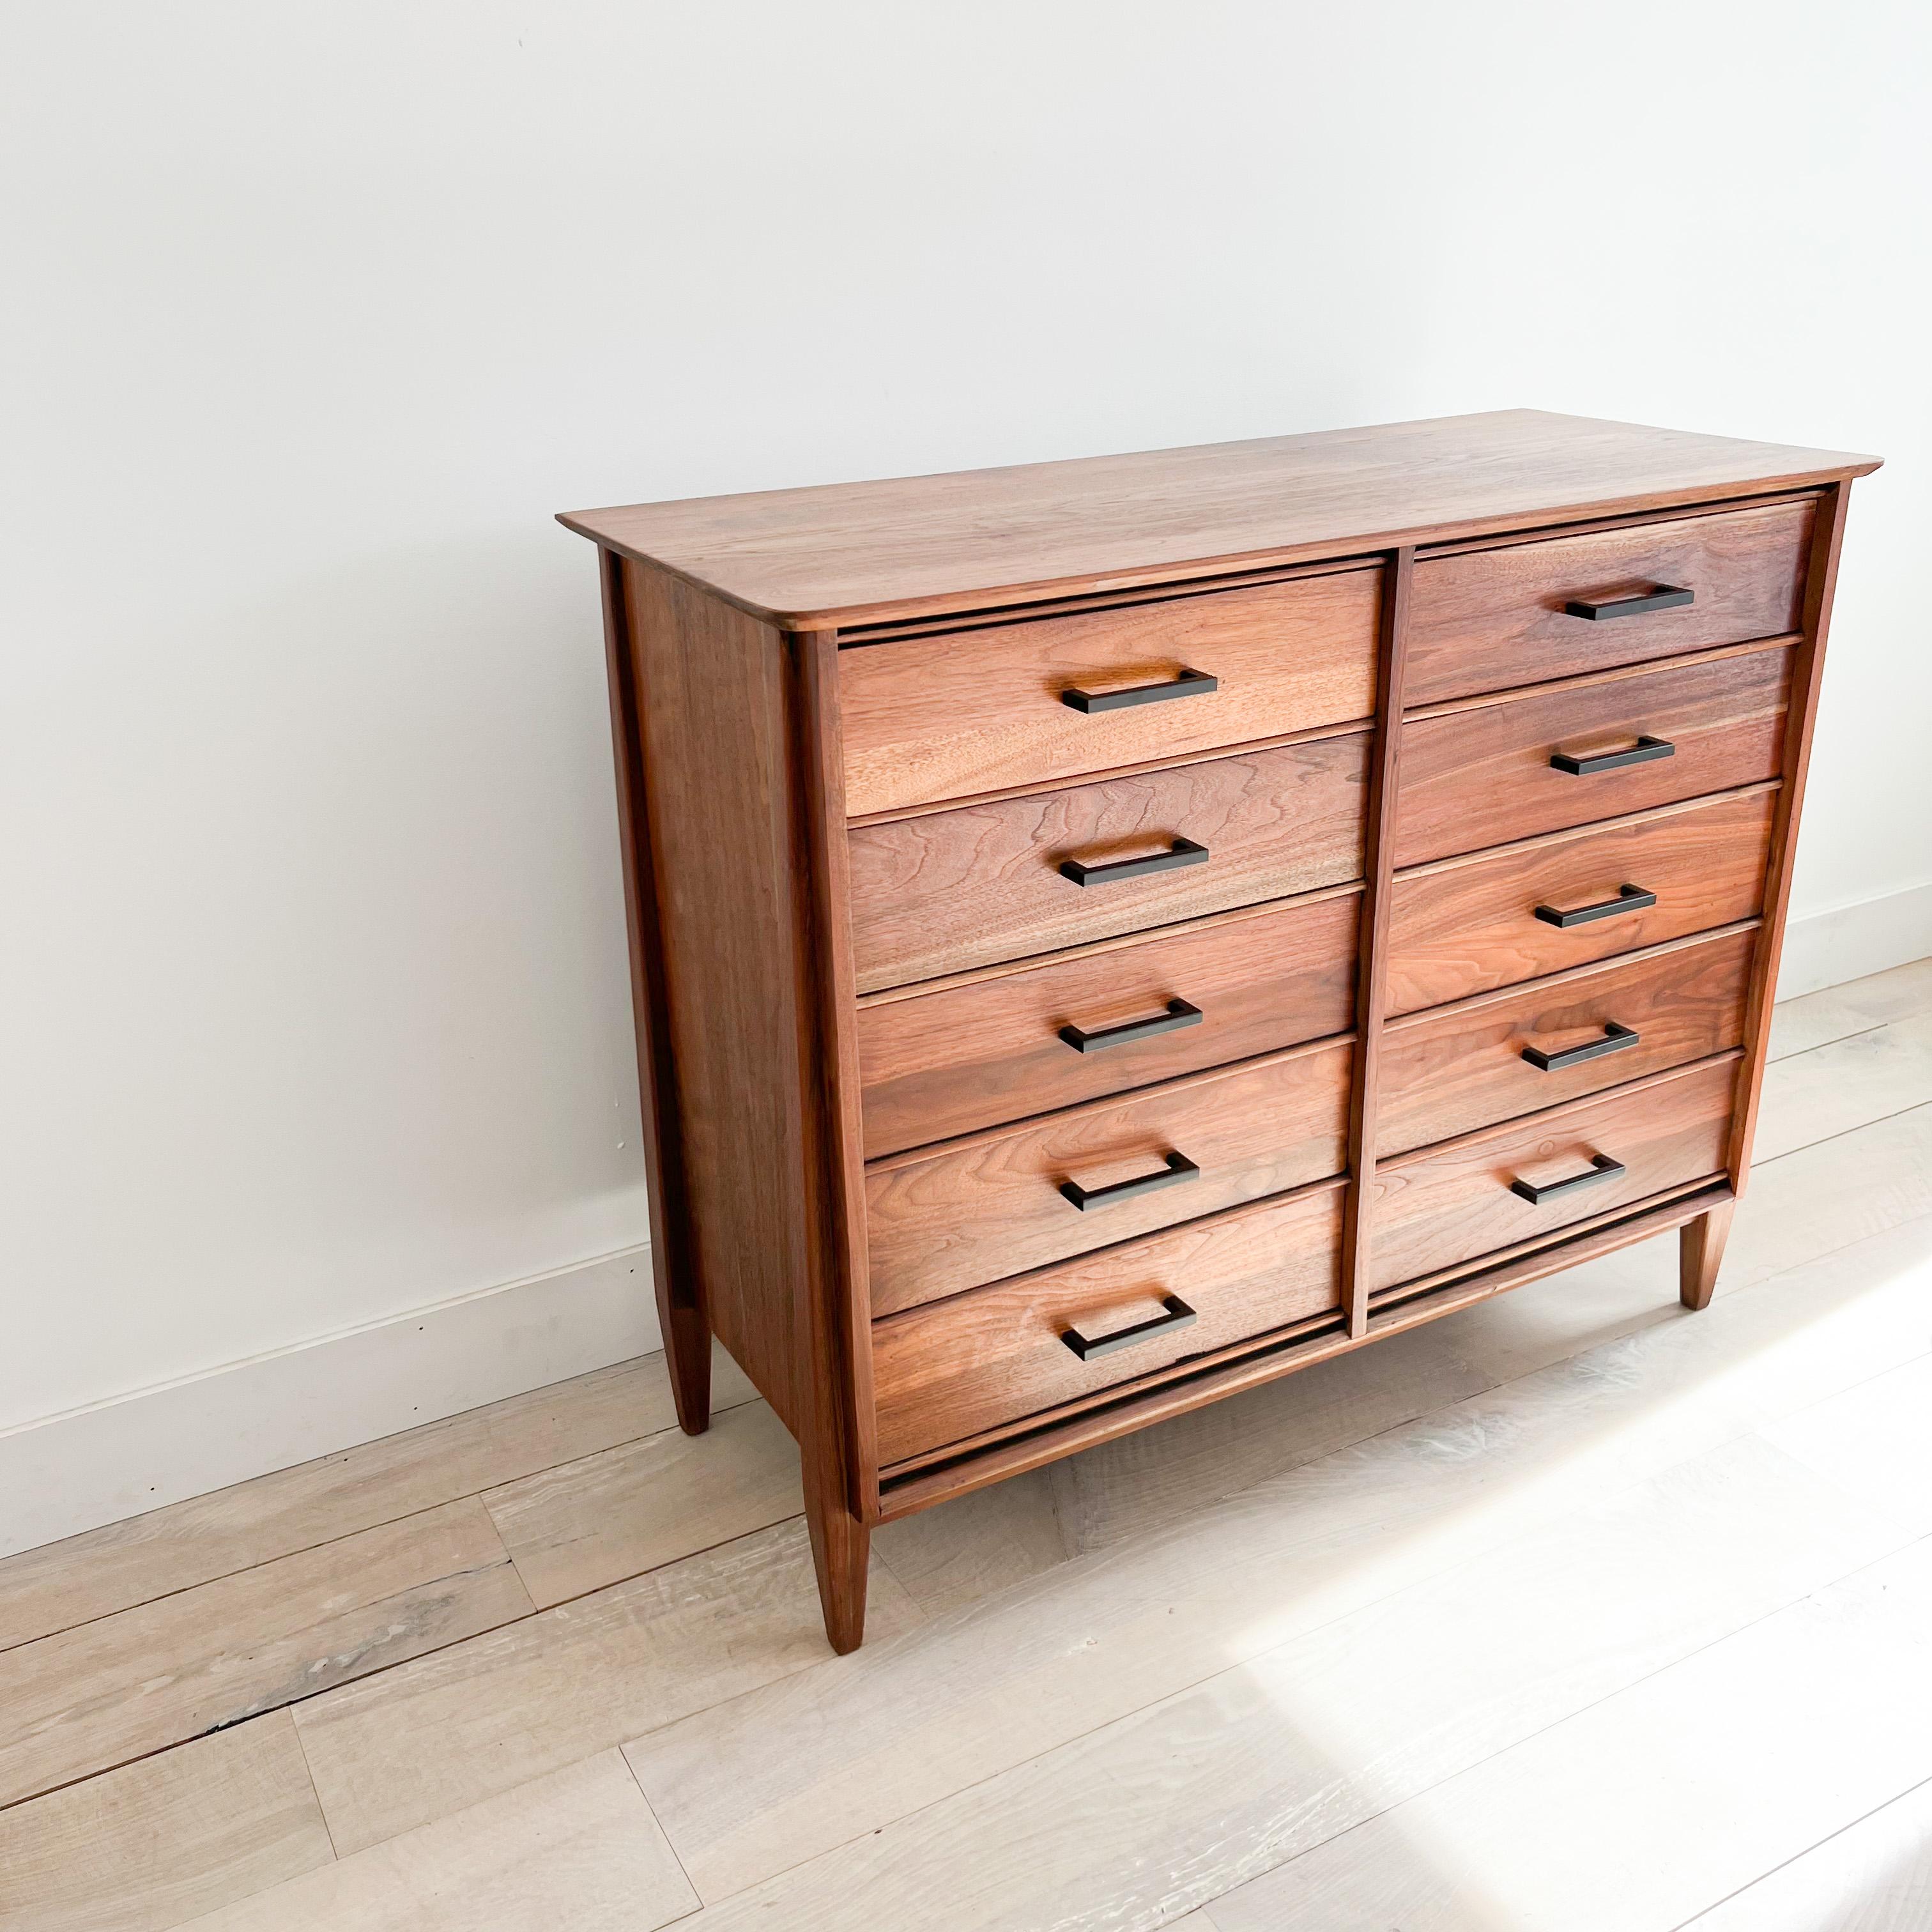 Mid-Century Modern solid walnut highboy dresser/gentlemen’s chest by Davis Cabinet Company. Fully sanded and restored. Some light scuffing/scratching from age appropriate wear.